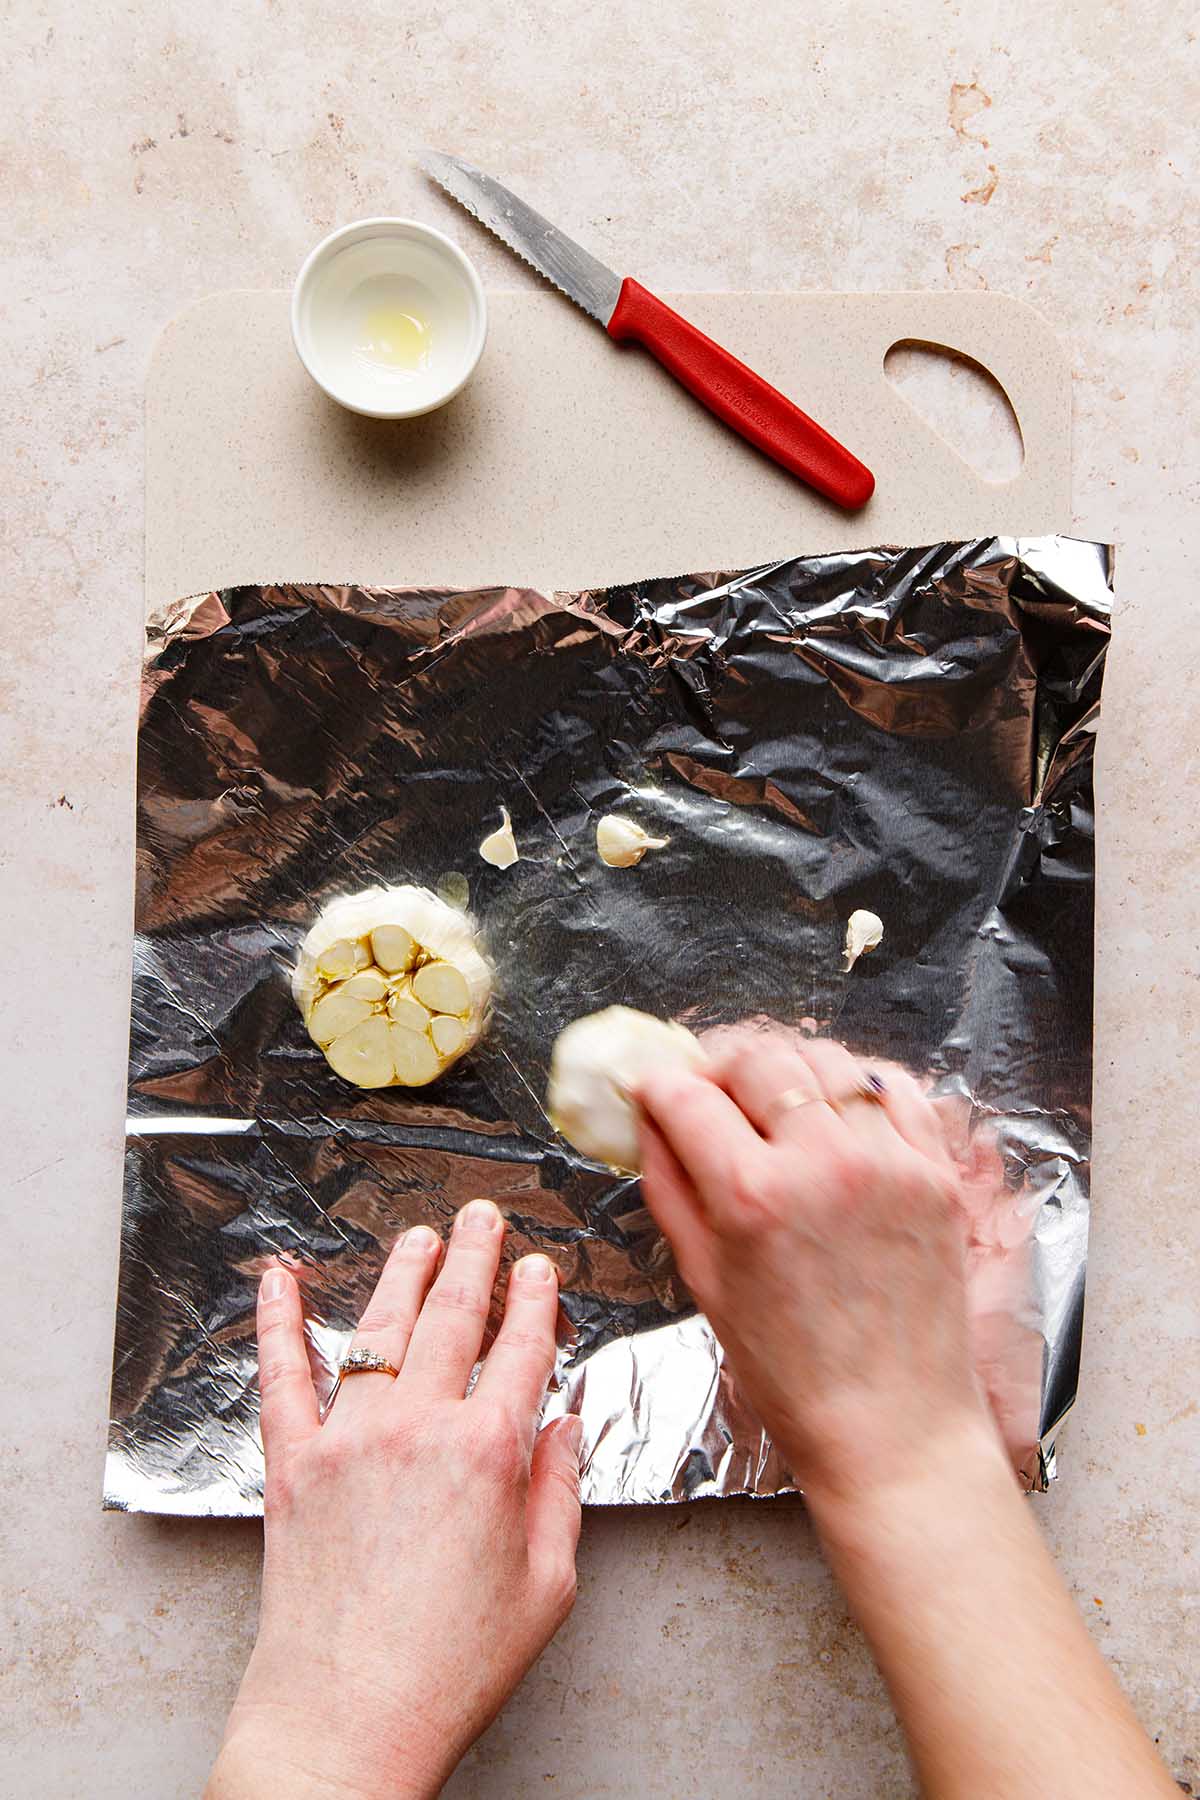 Hands rubbing garlic in oil on a piece of foil.